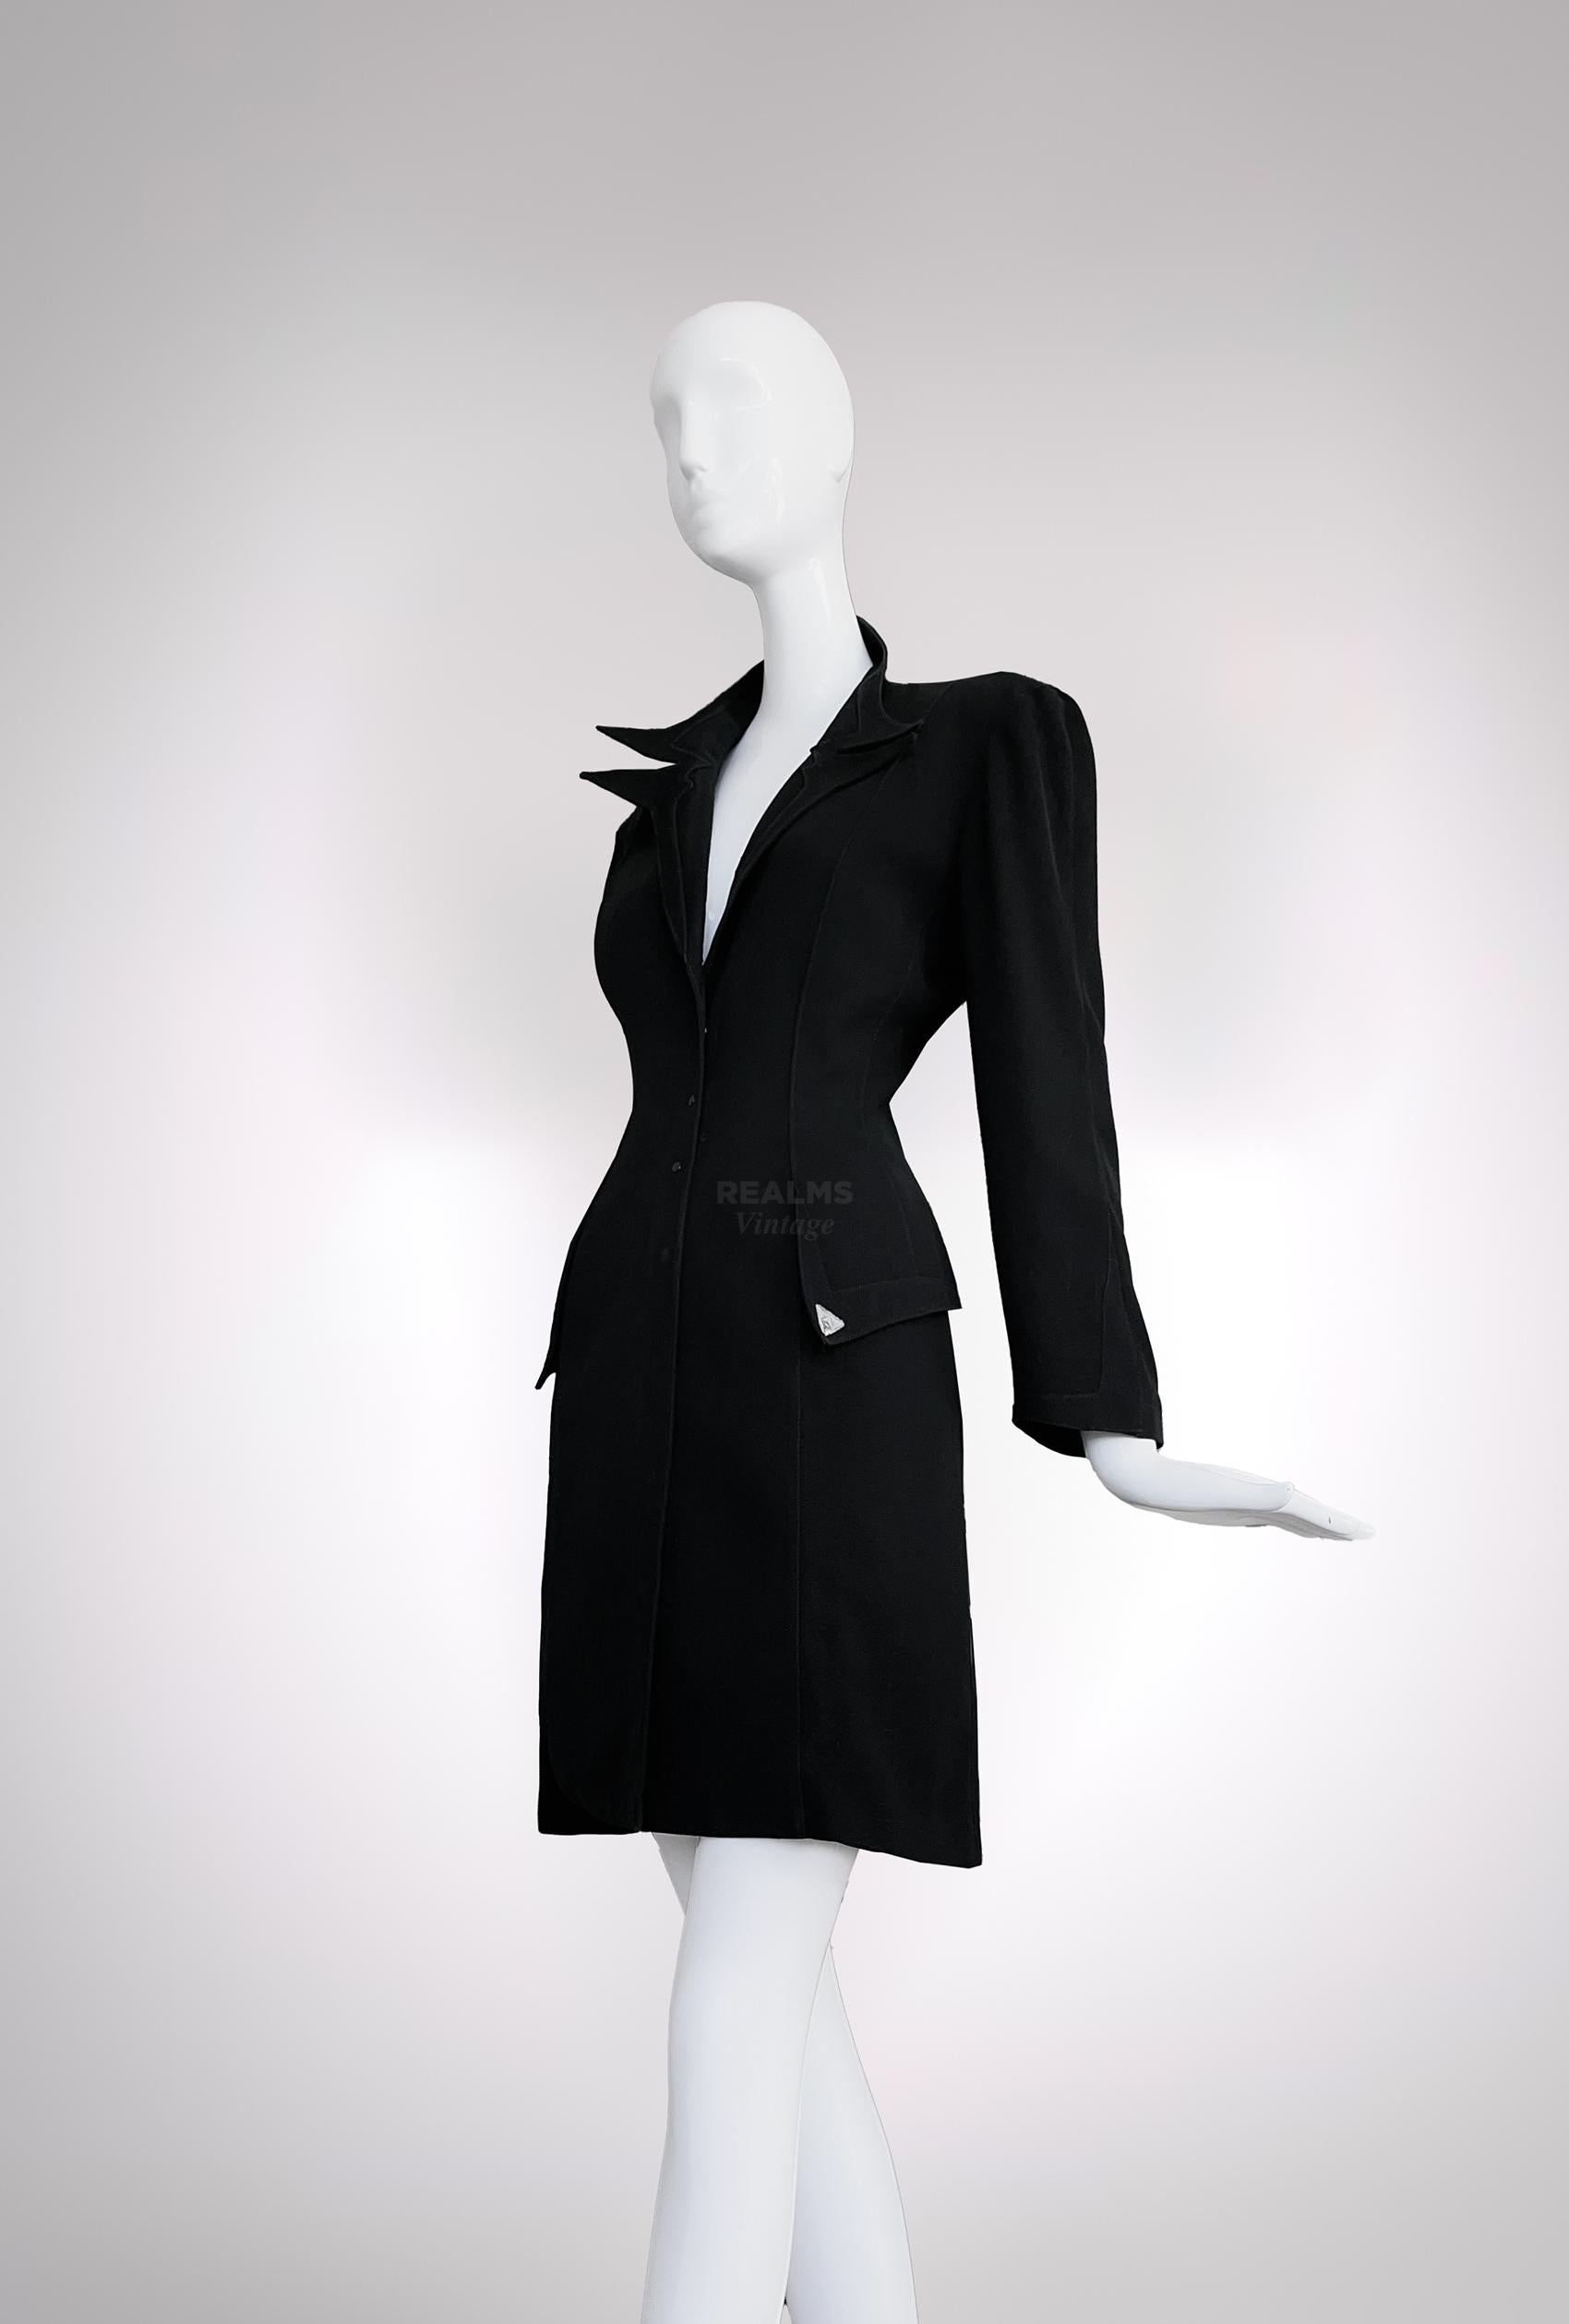 Beautiful rare Thierry Mugler piece. Black light jacket / coat with dramatic pointy collar. Long jacket that closes with press buttons on the front. Soft and light fabric, assuming cotton/wool blend. Two lapels at the waist to exaggerate the